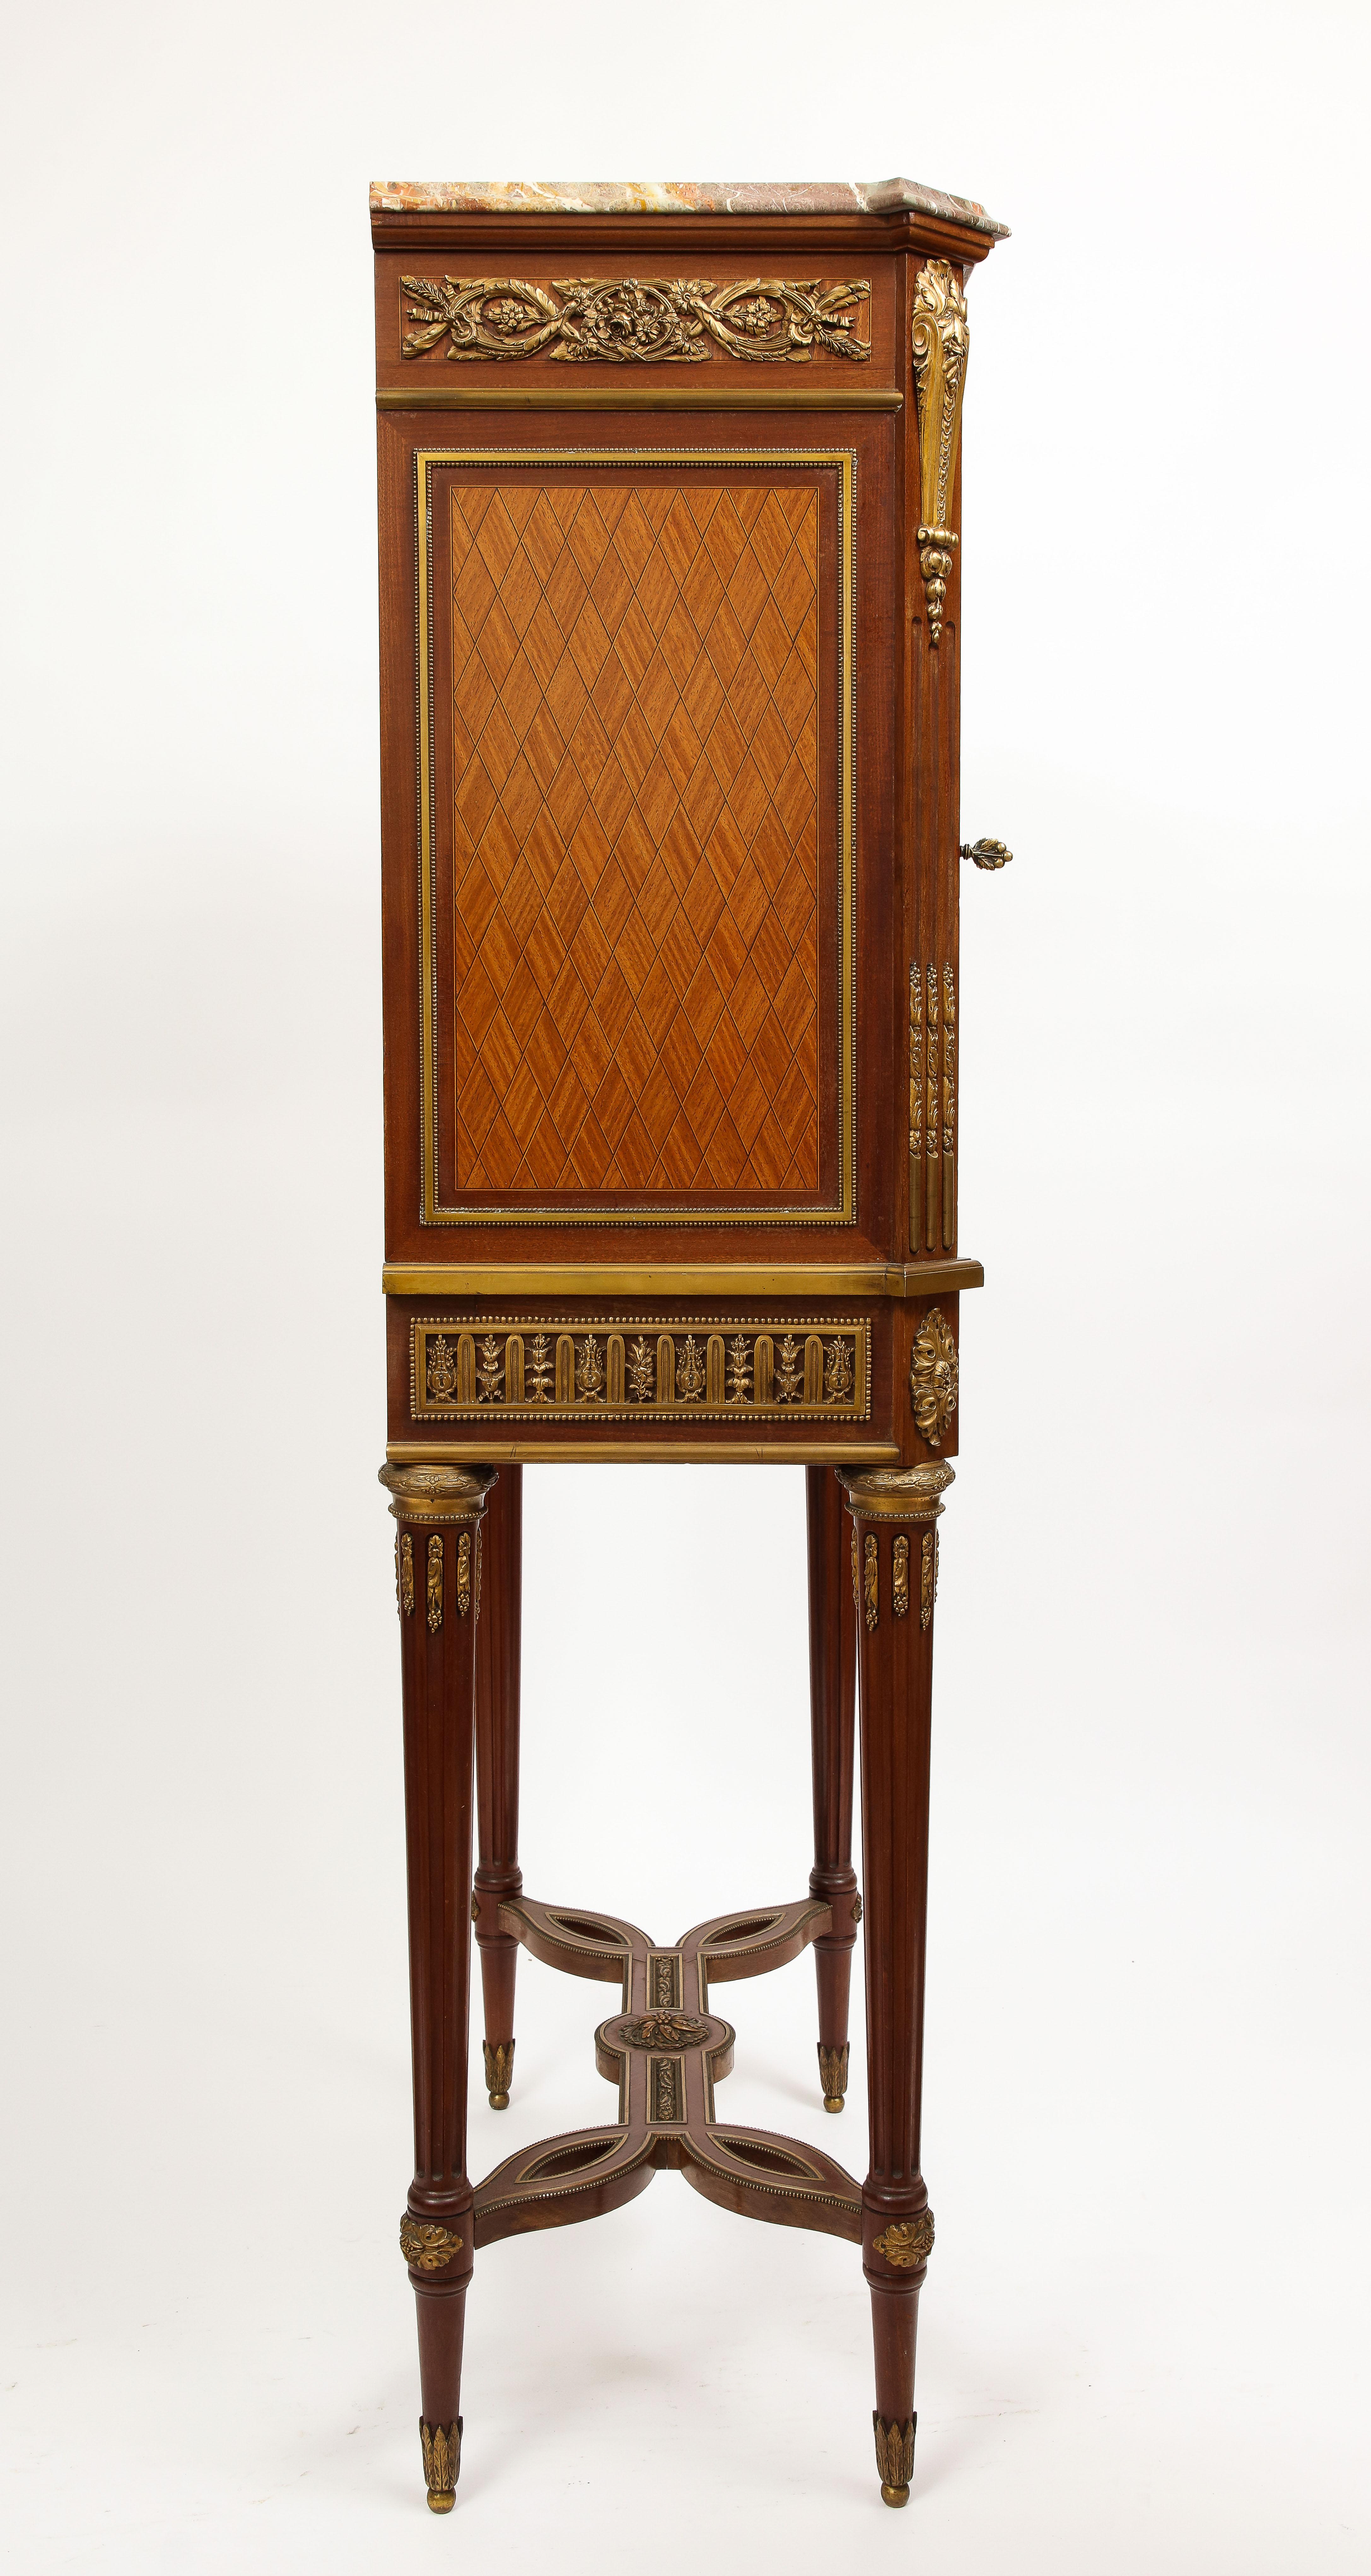 French 19th Century Dore Bronze and Sèvres Porcelain Mounted Parquetry Cabinet For Sale